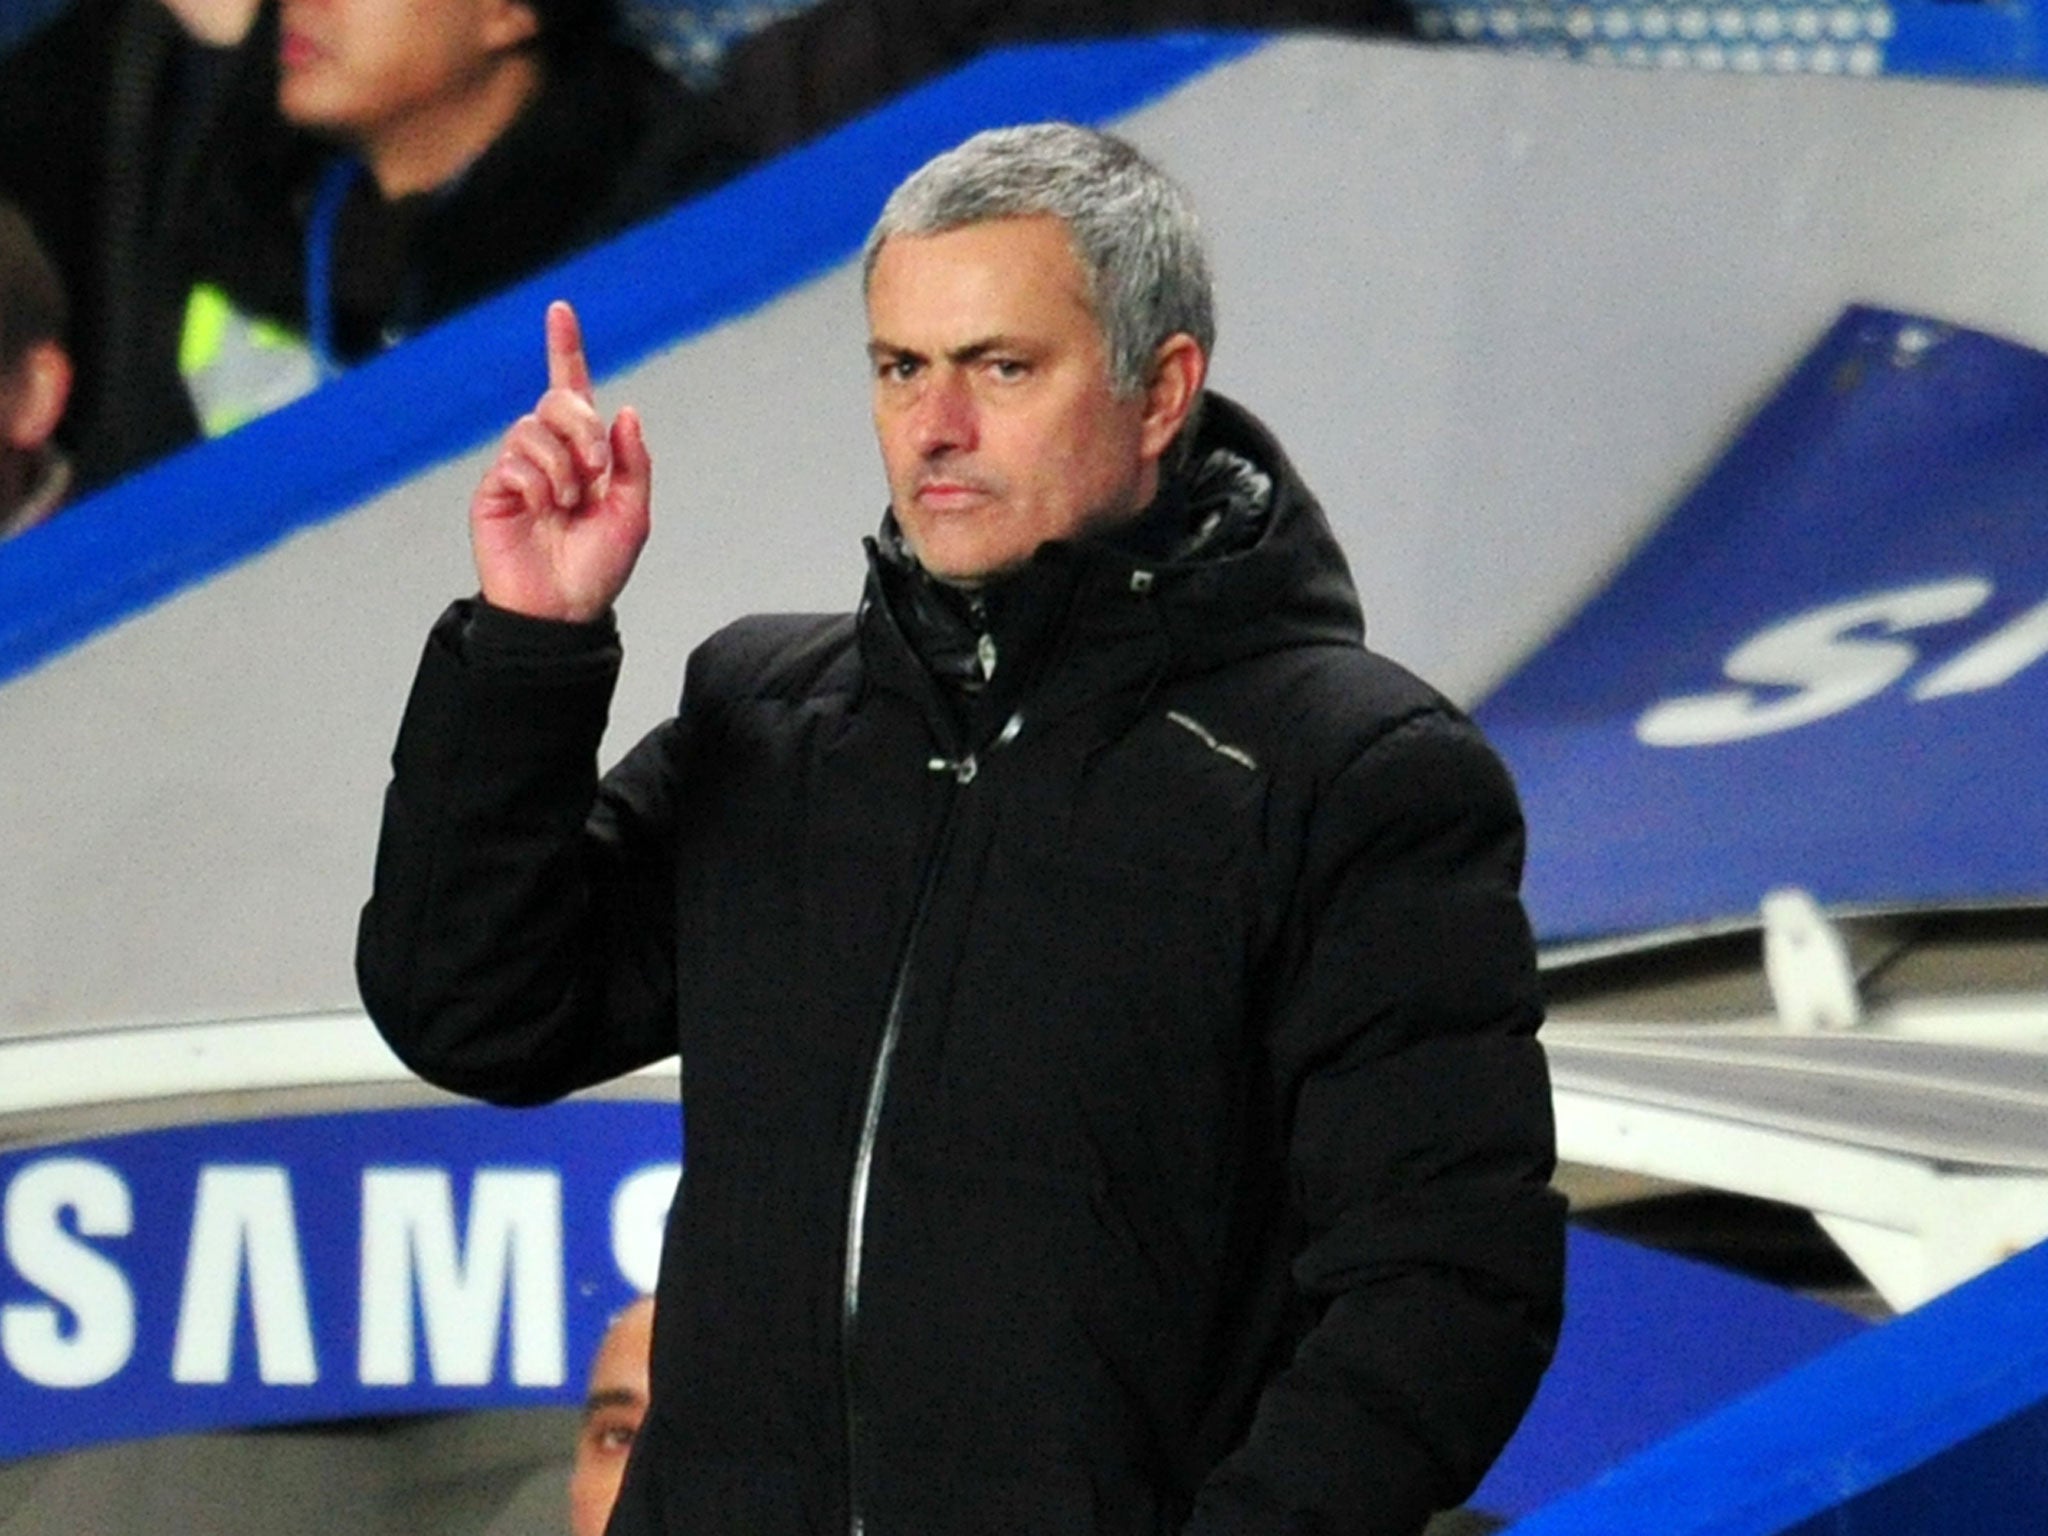 Jose Mourinho's Chelsea side face Stoke City in the FA Cup on Sunday